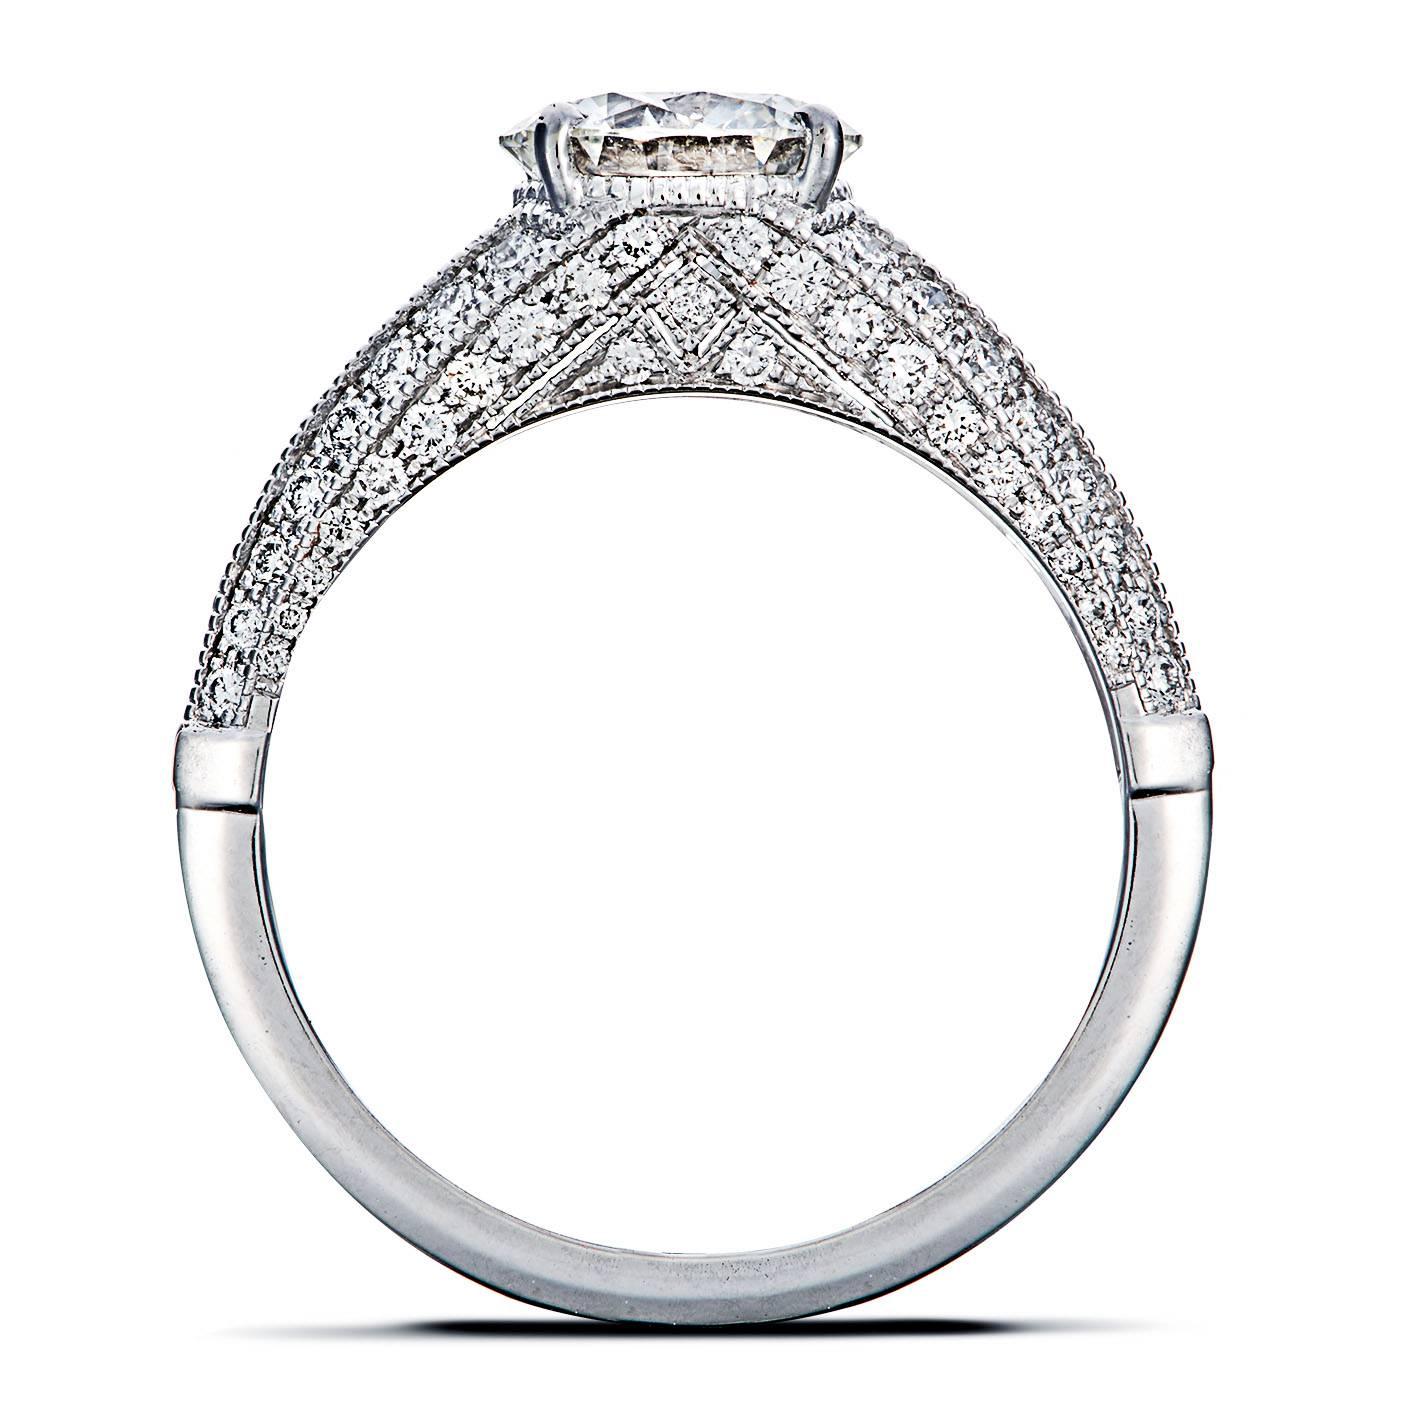 The Raquel ring is mounted in 18k white gold showcases a GIA certified 1.35 carat H VS1 brilliant-cut diamond, highlighted by pavé  round diamonds (FVS), for a total weight of 0.80 carats. The ring is set with a miligree setting technique as an Art